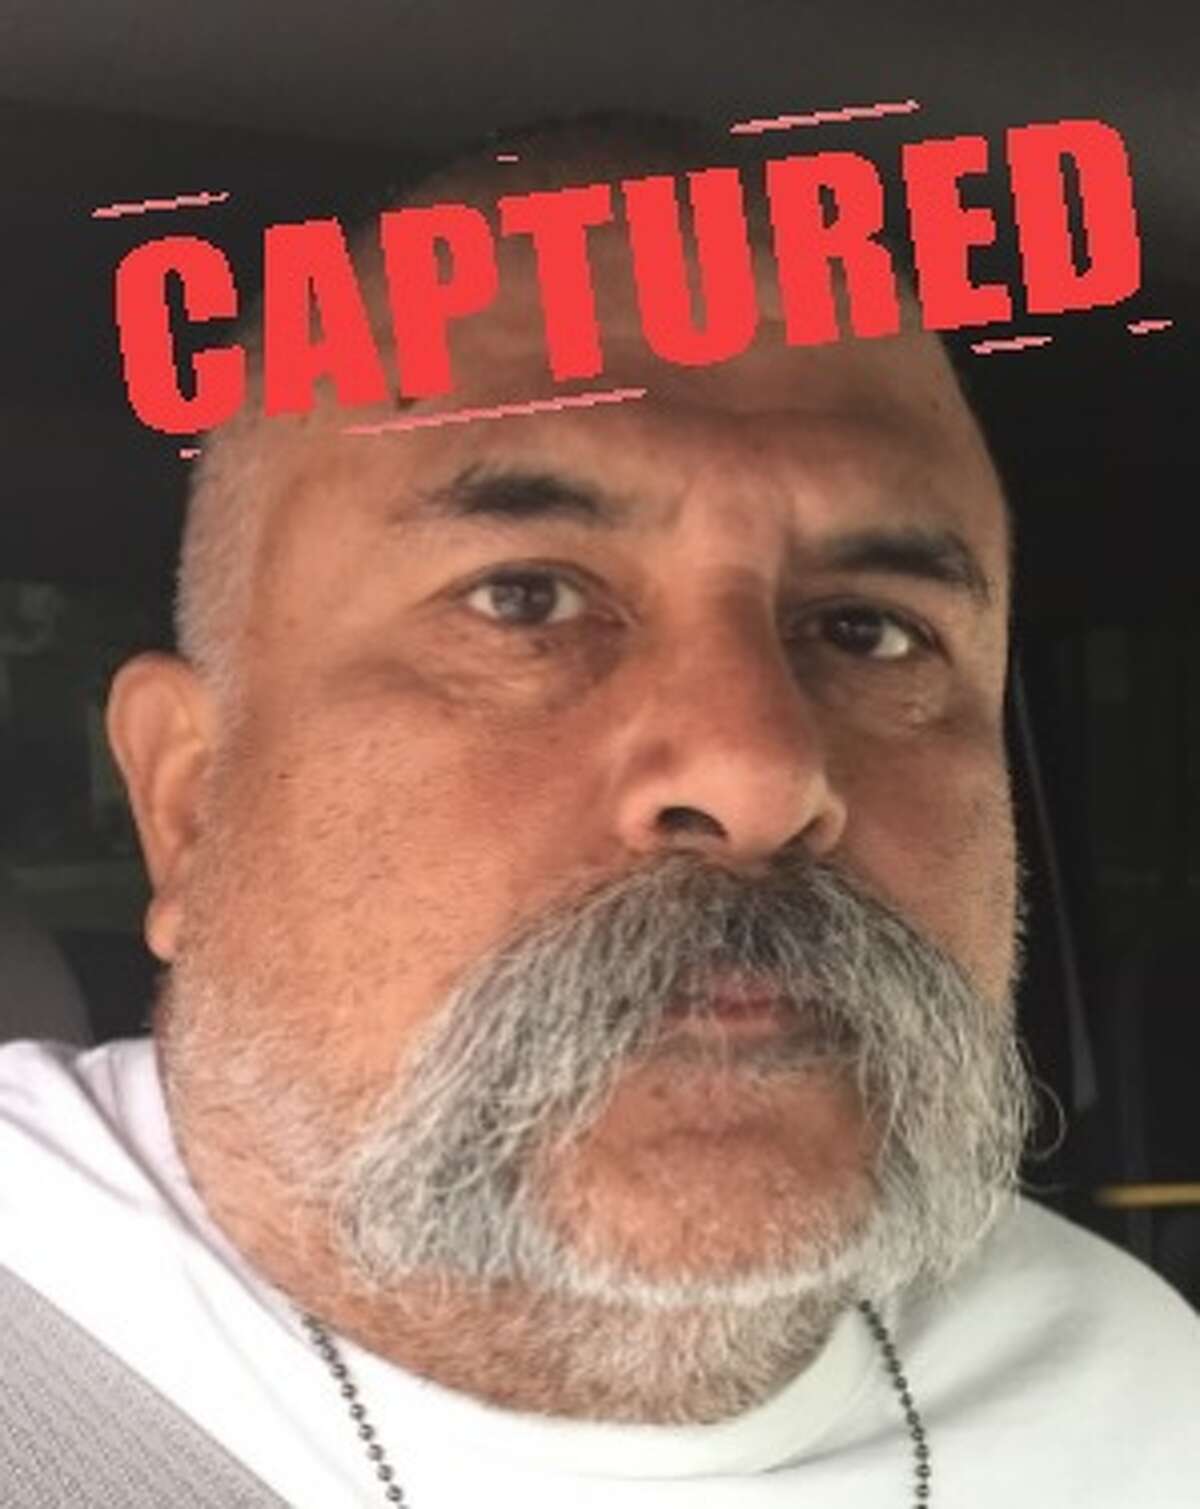 Jose Julio Arce Jr., 56, was apprehended in Bexar County Jan. 25, 2017 after failing to register as a sex offender.